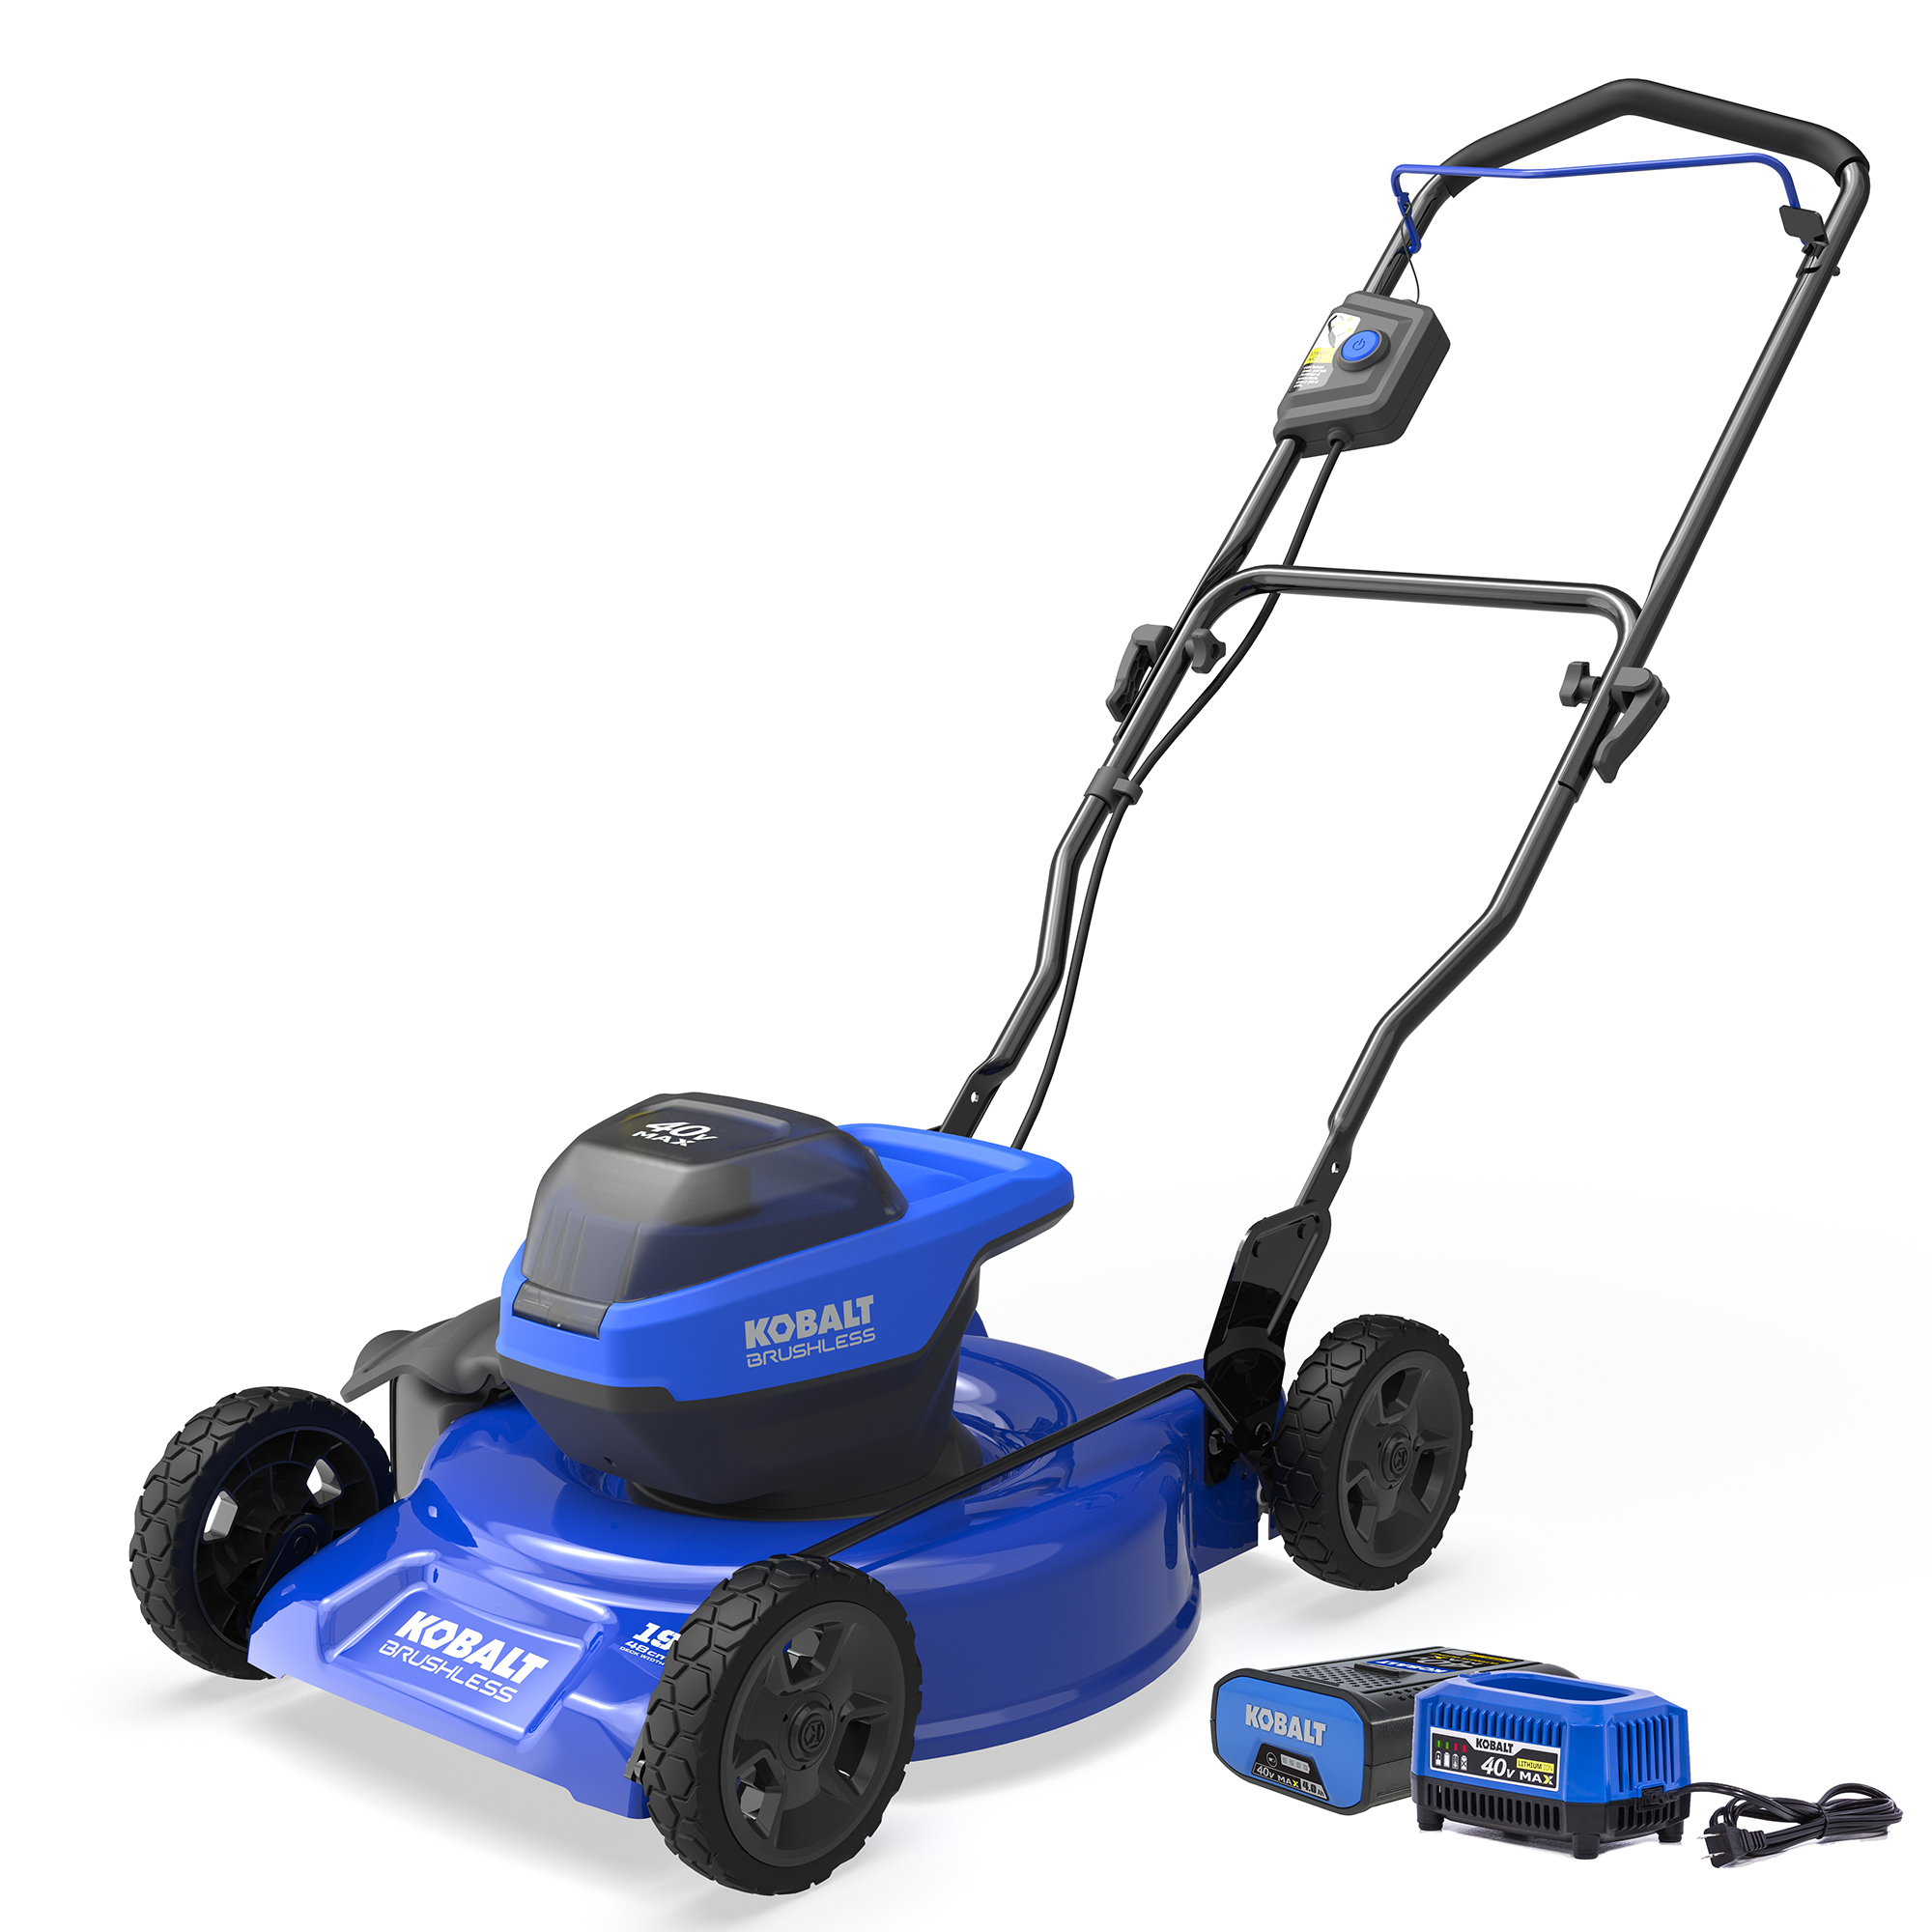 4000W 36000RPM Brushless Cordless Electric Lawn Mower